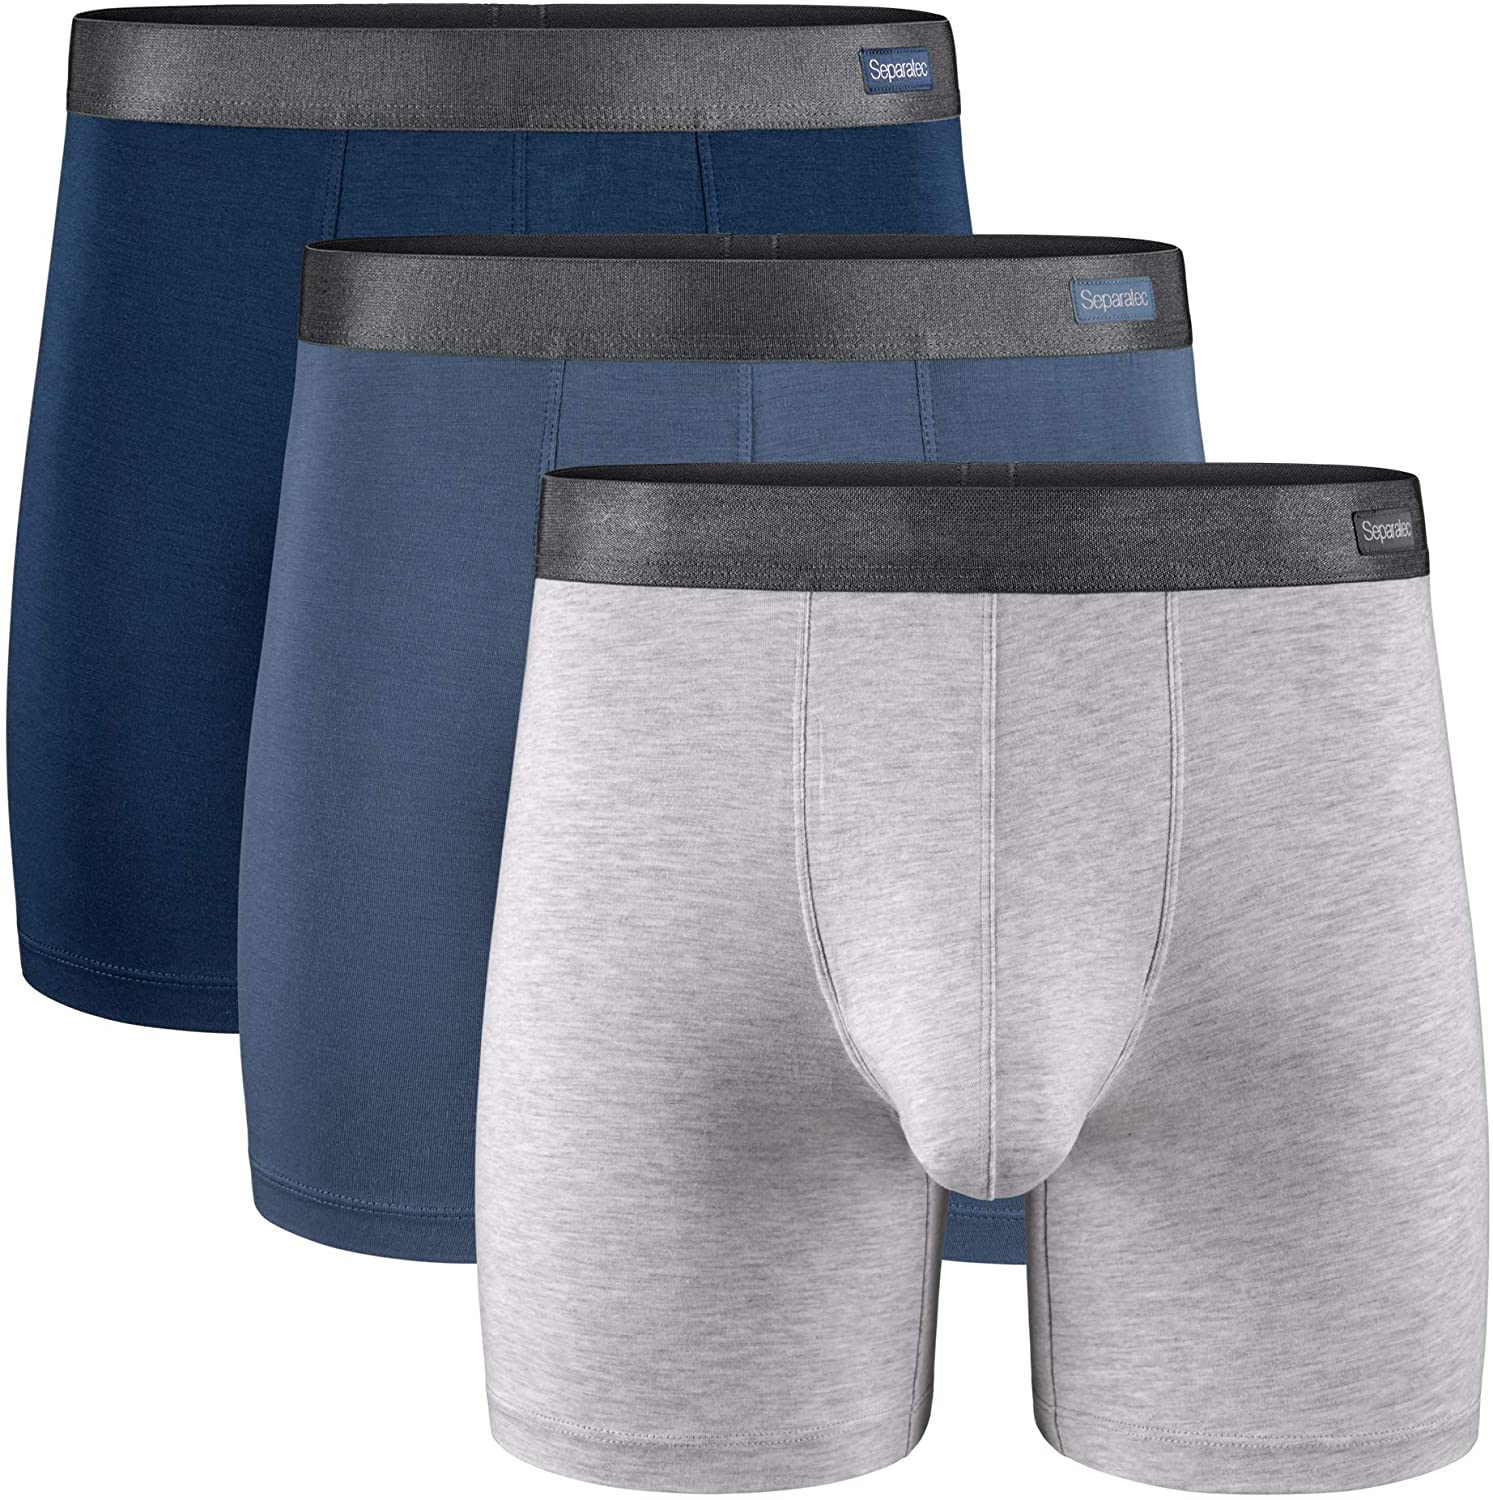 Separatec Men's Underwear Comfort Soft Micro Modal Trunks with Dual Pouch 3  Pack